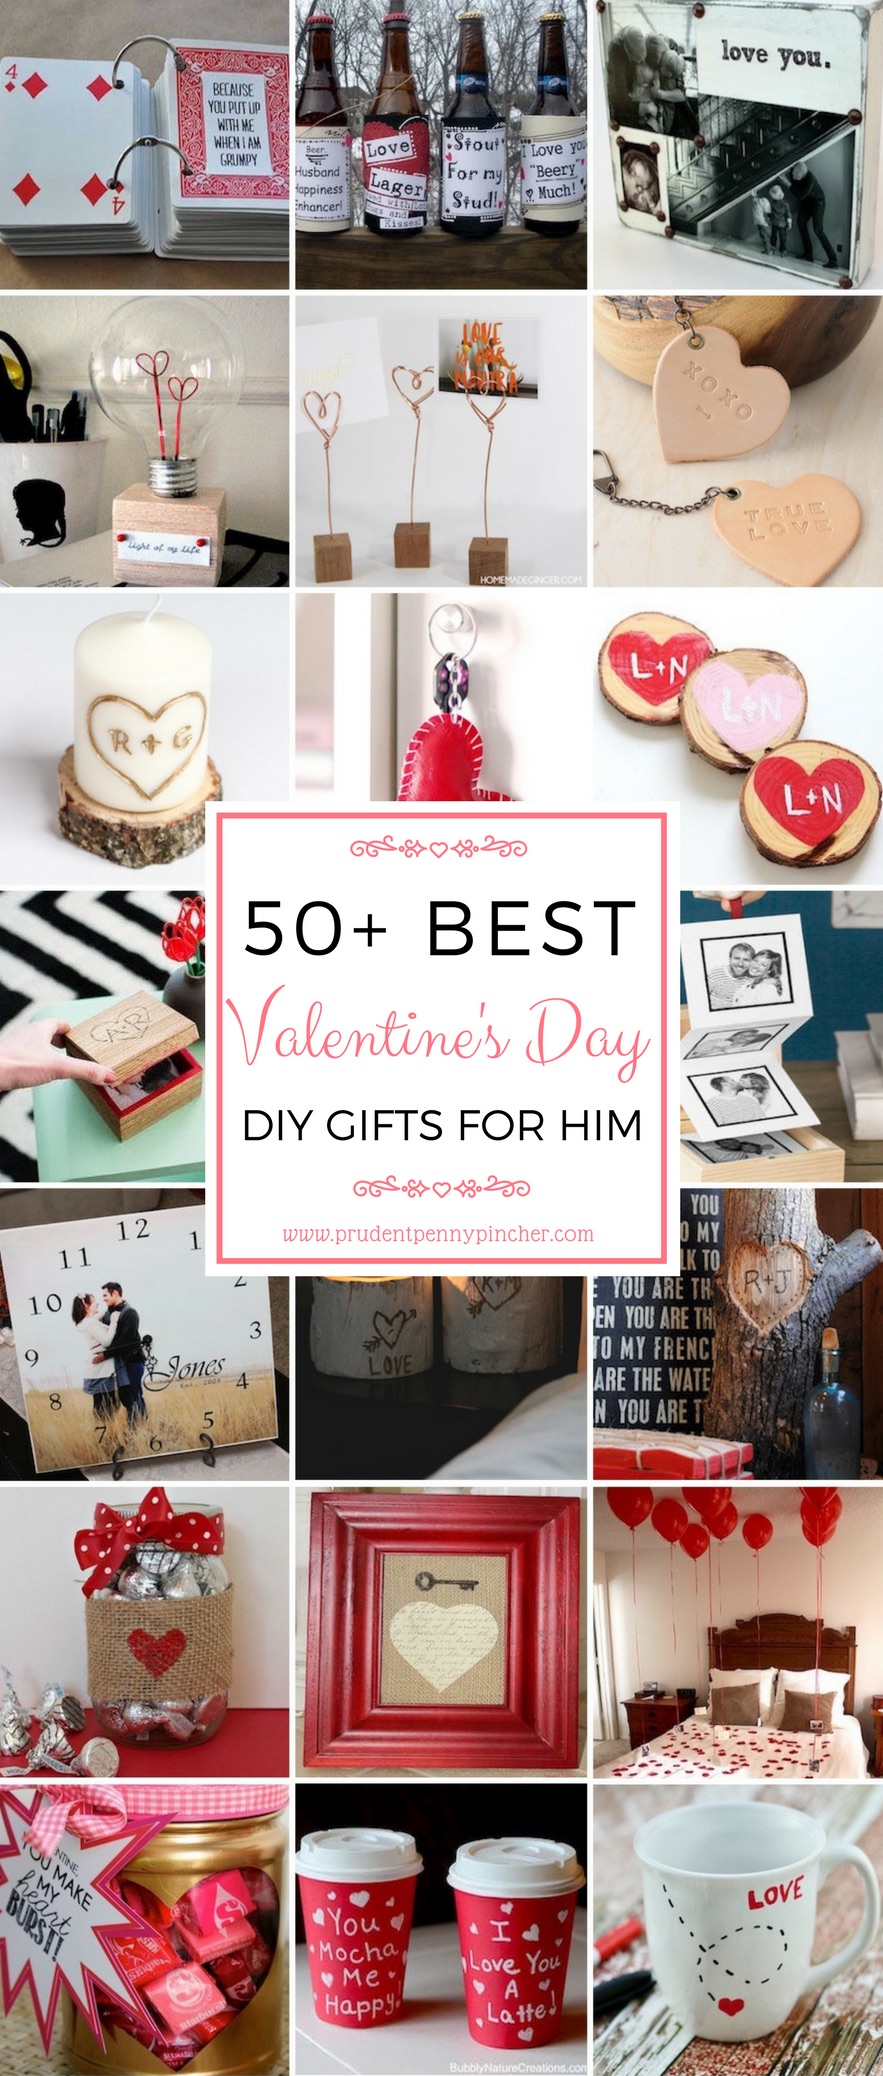 50 DIY Valentines Day Gifts for Him Prudent Penny Pincher